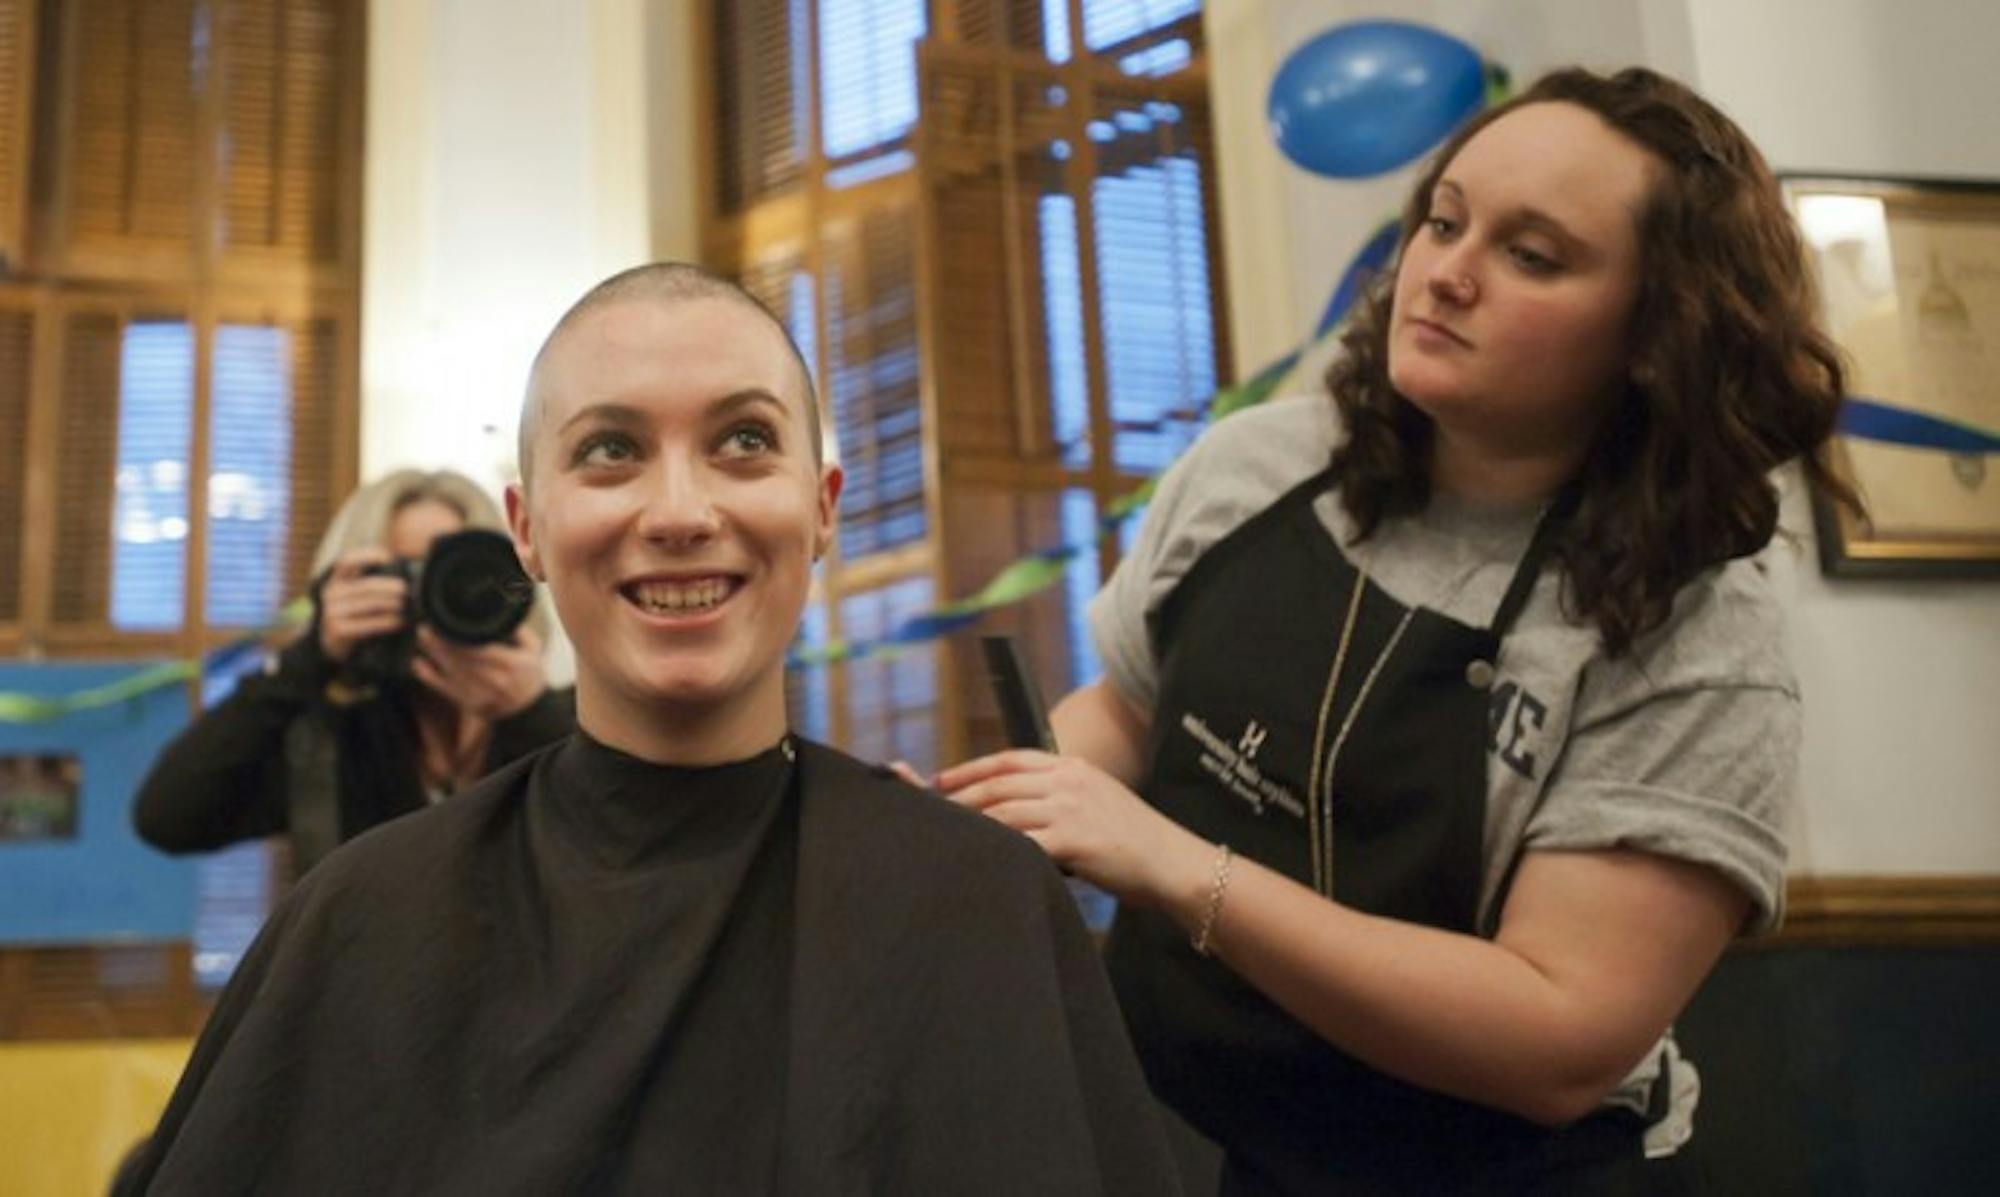 Former Notre Dame student Colleen Boyle gets her head shaved at last year’s The Bald and the Beautiful event. The club raises funds and spreads awareness for cancer research, with nearly 300 shaves per year.